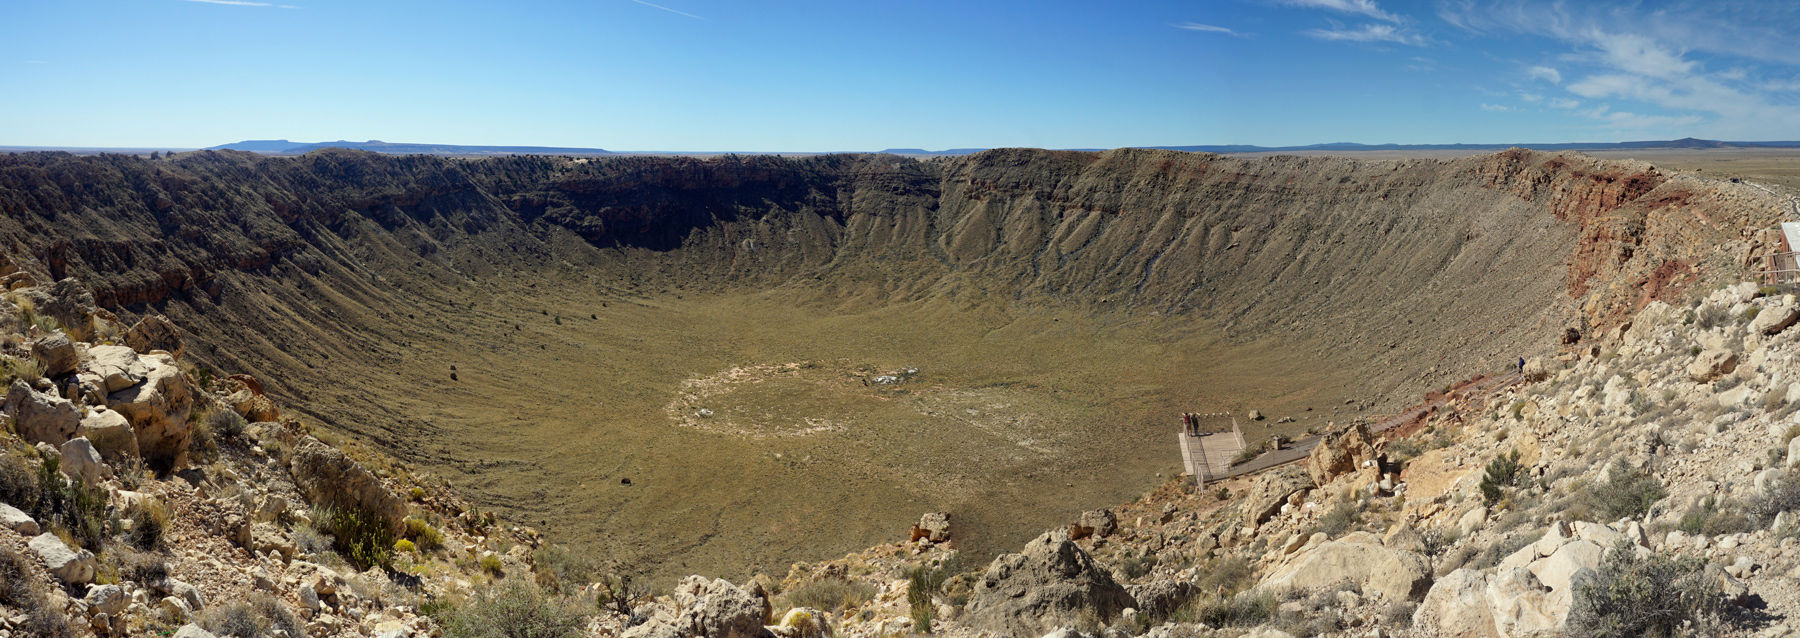 Meteor Crater in Arizona is one of the best-preserved impact craters on Earth. Credit: Mario Roberto Durán Ortiz